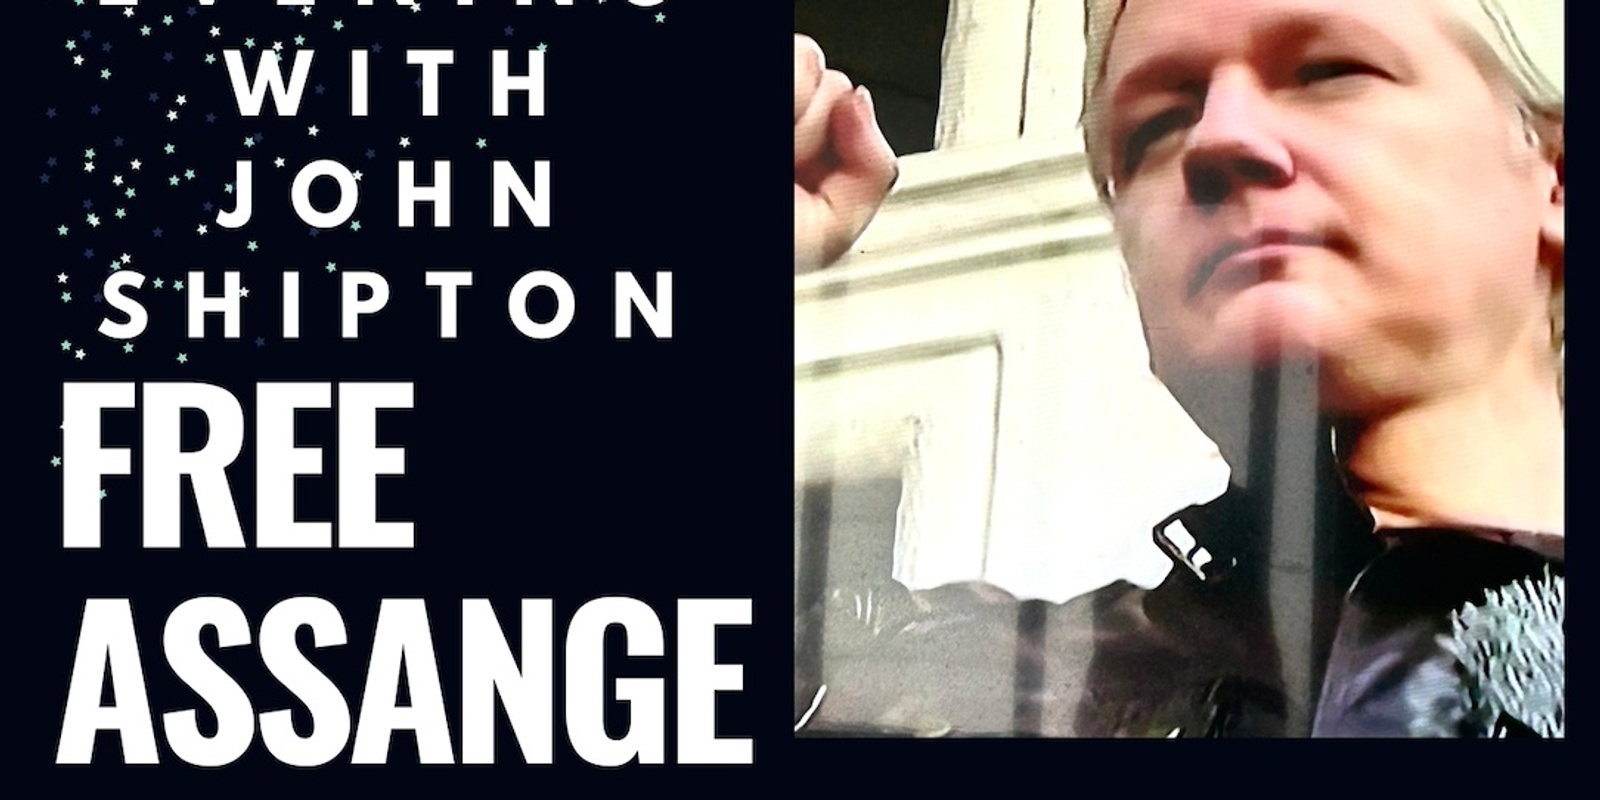 Banner image for An Evening with John Shipton - FREE ASSANGE, THE MAYDAY TOUR